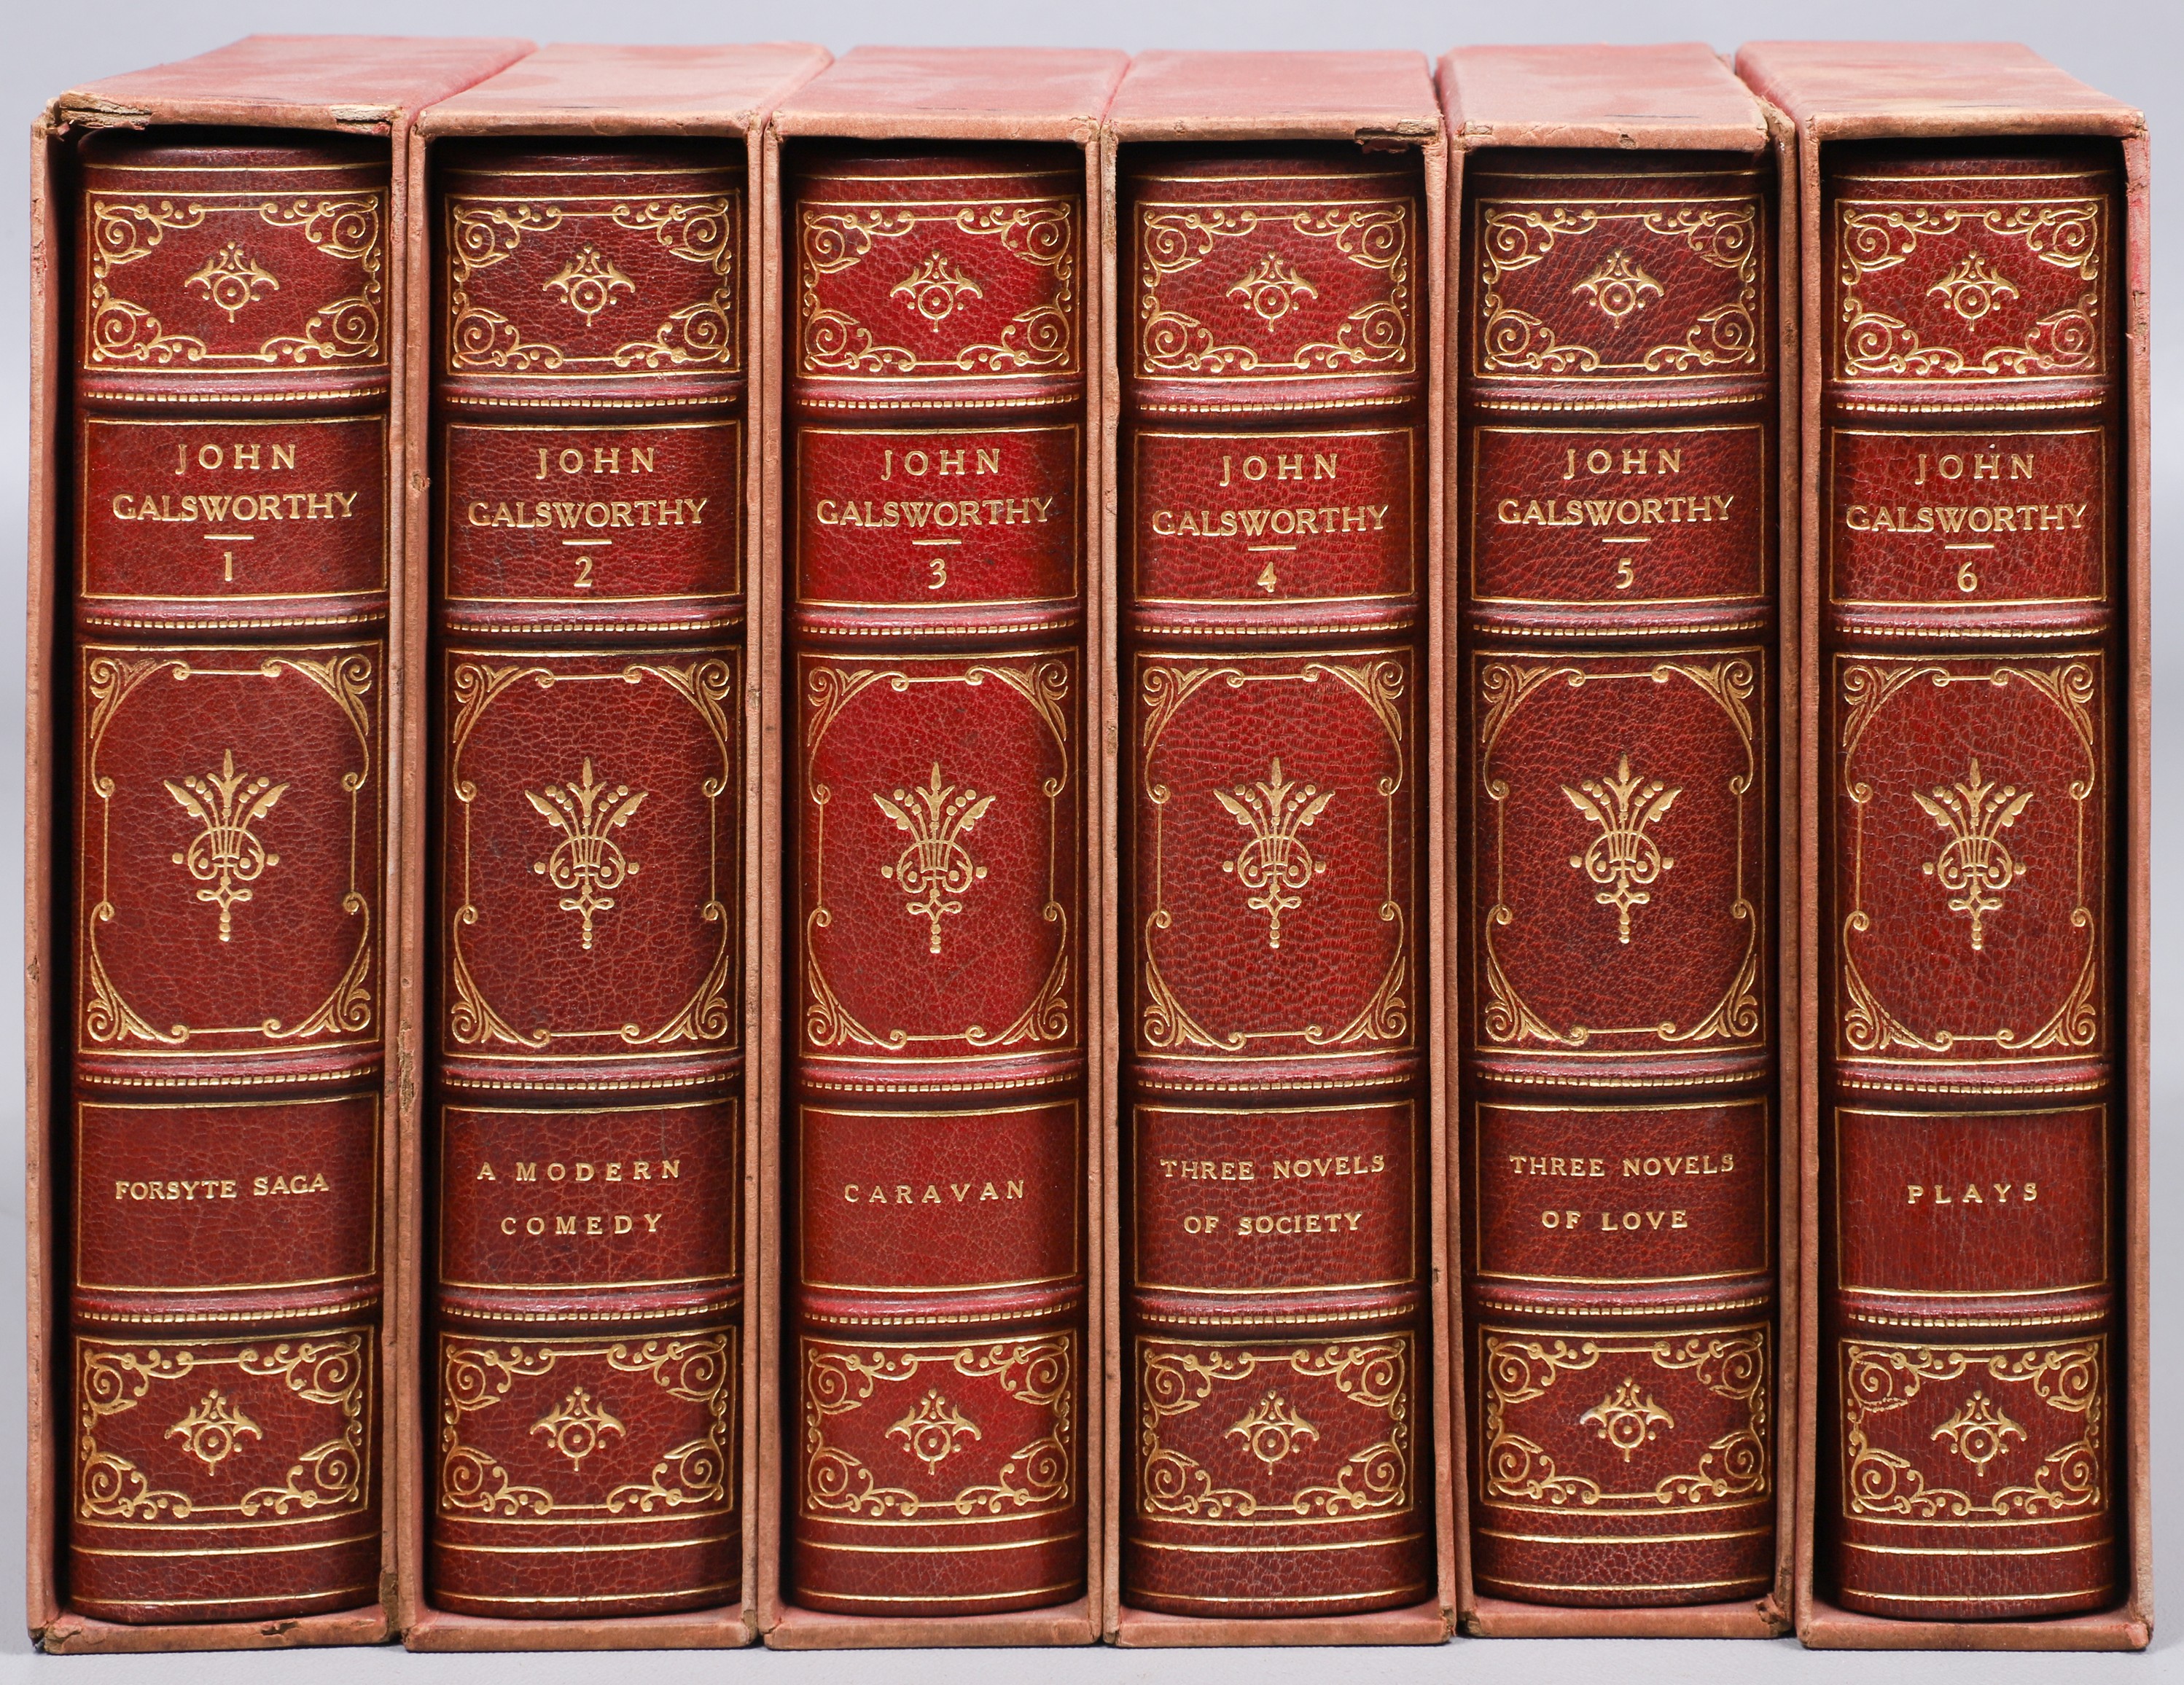 The First Edition of the Galsworthy